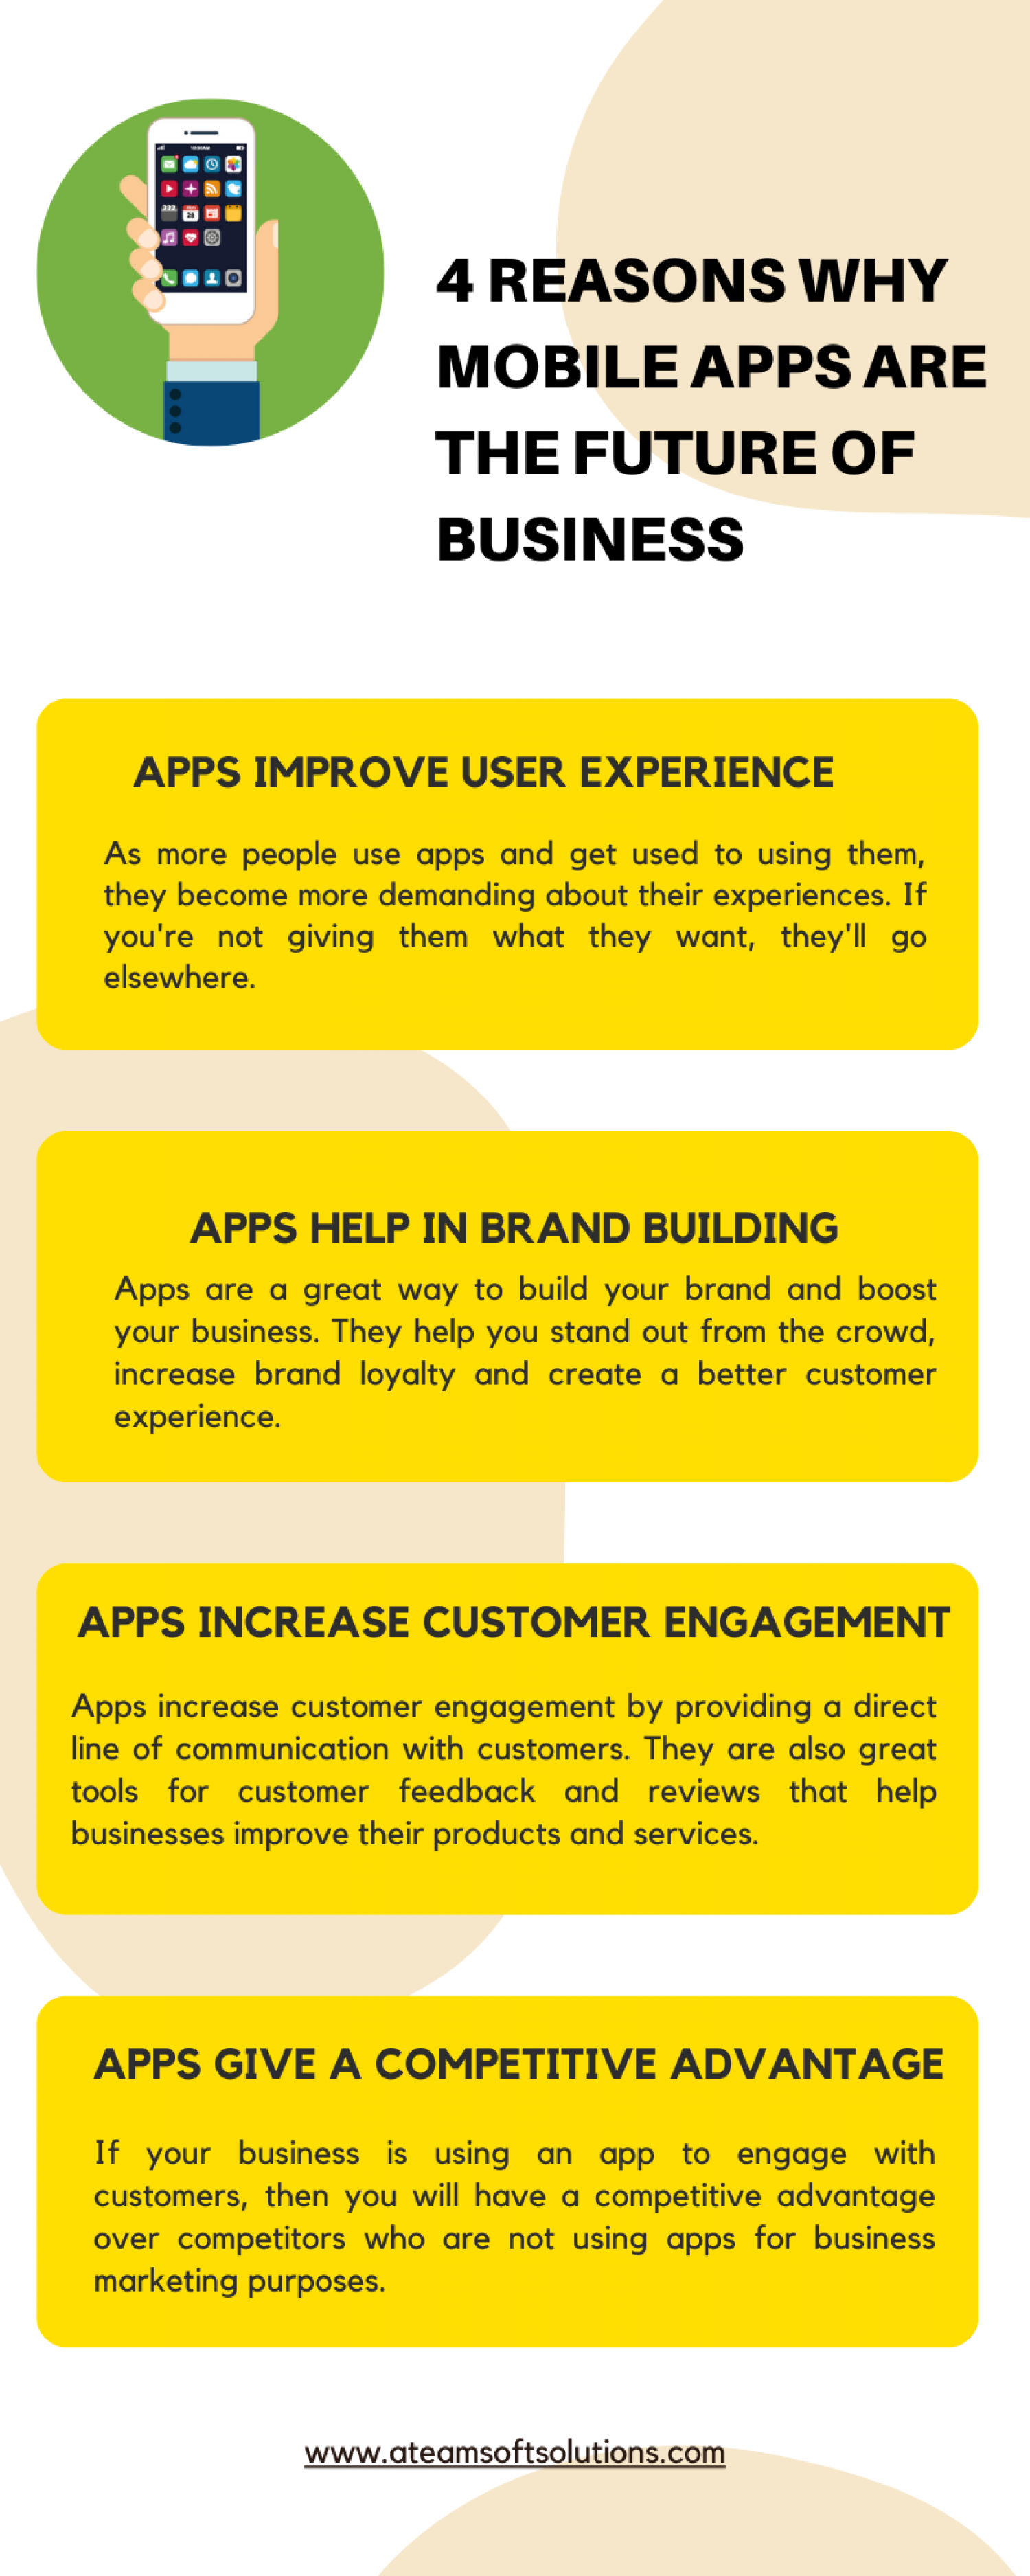 4 Reasons Why Mobile Apps Are the Future of Business Infographic